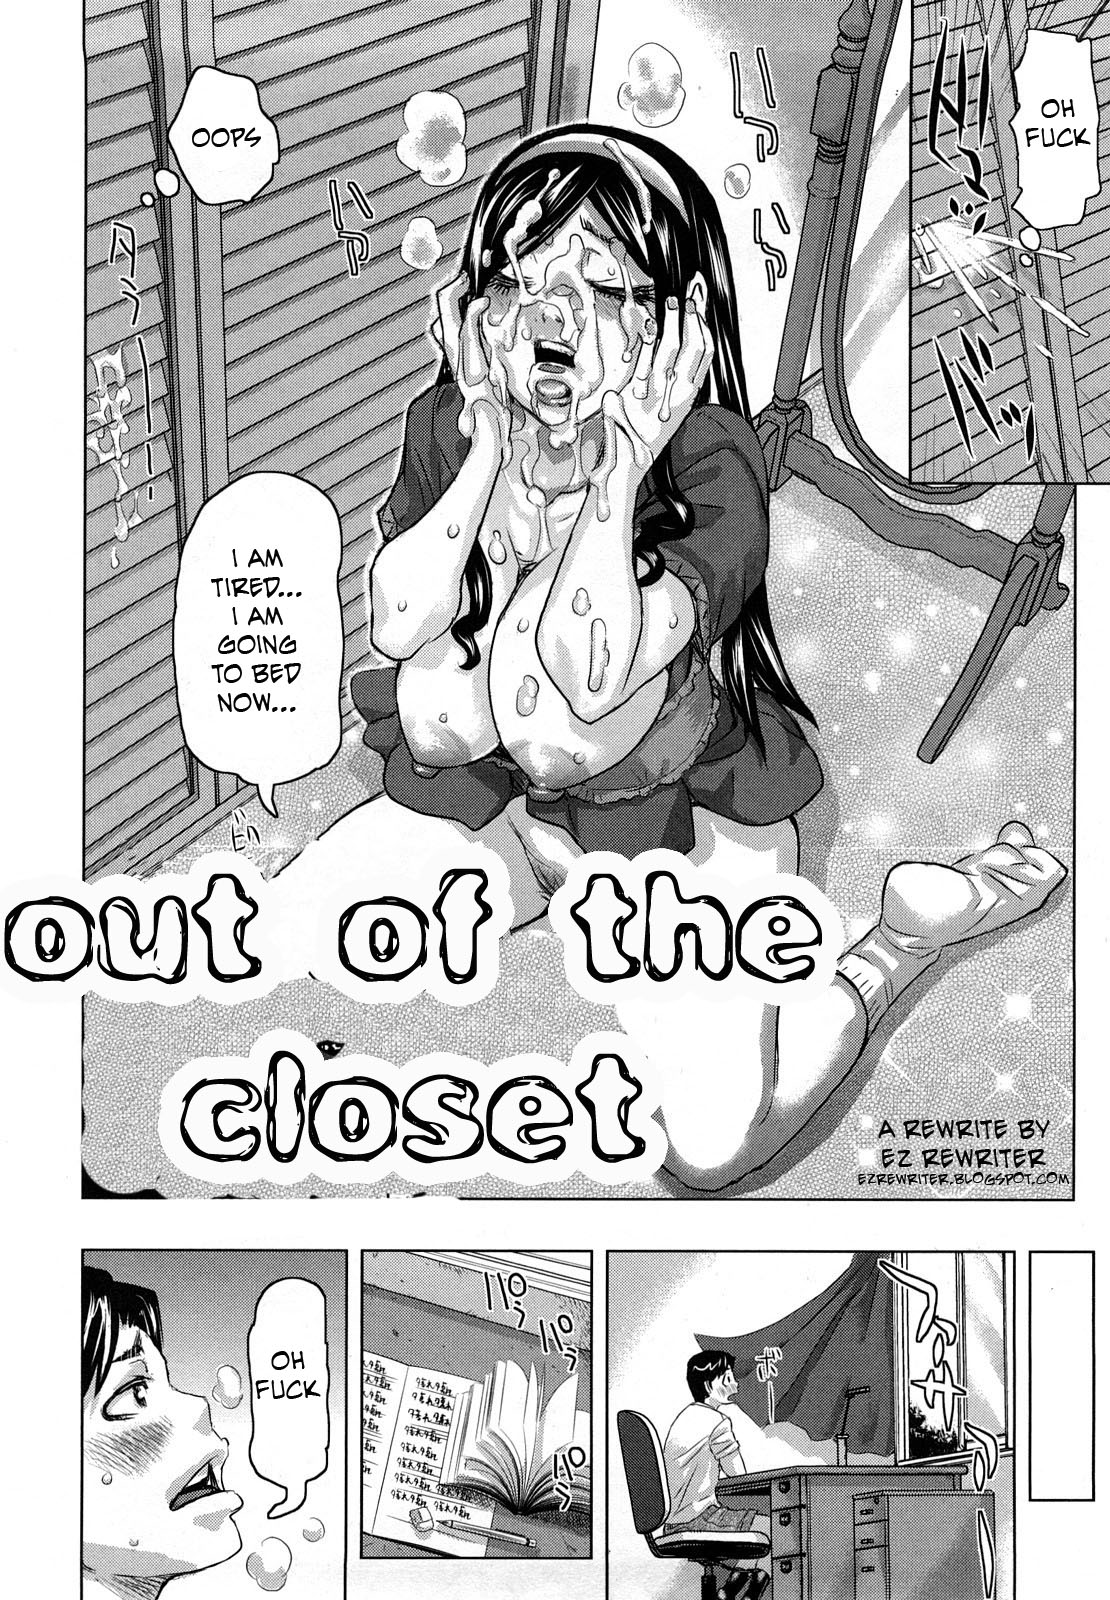 out of the closet (rewritre by ezrewriter) 